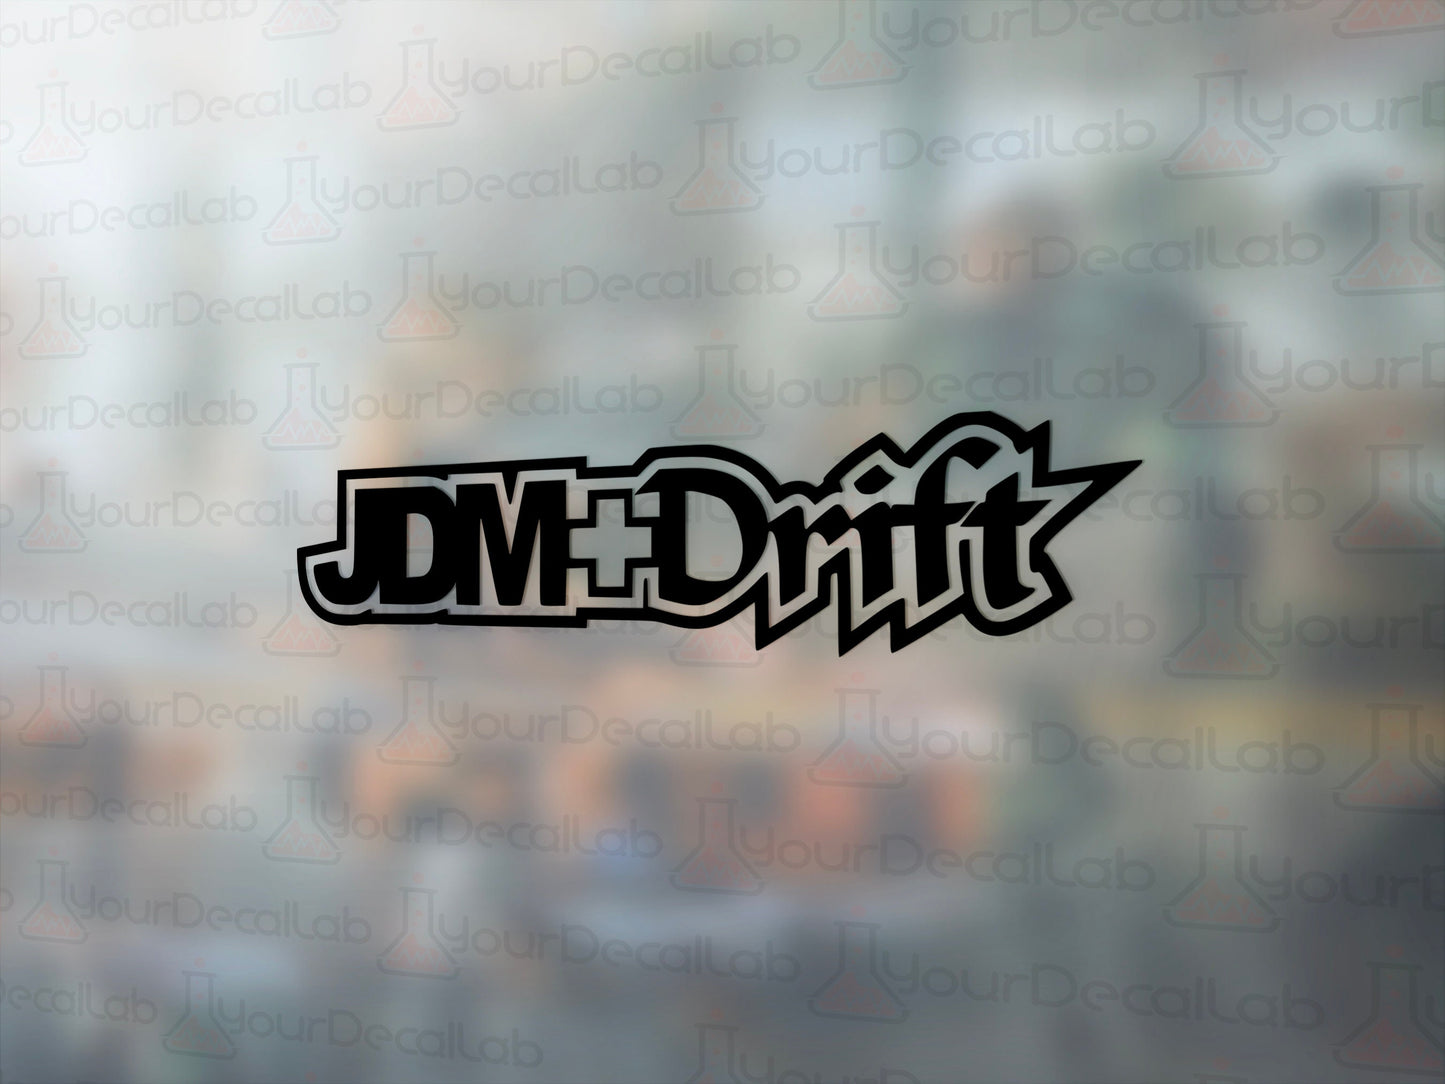 JDM+Drift Decal - Many Colors & Sizes